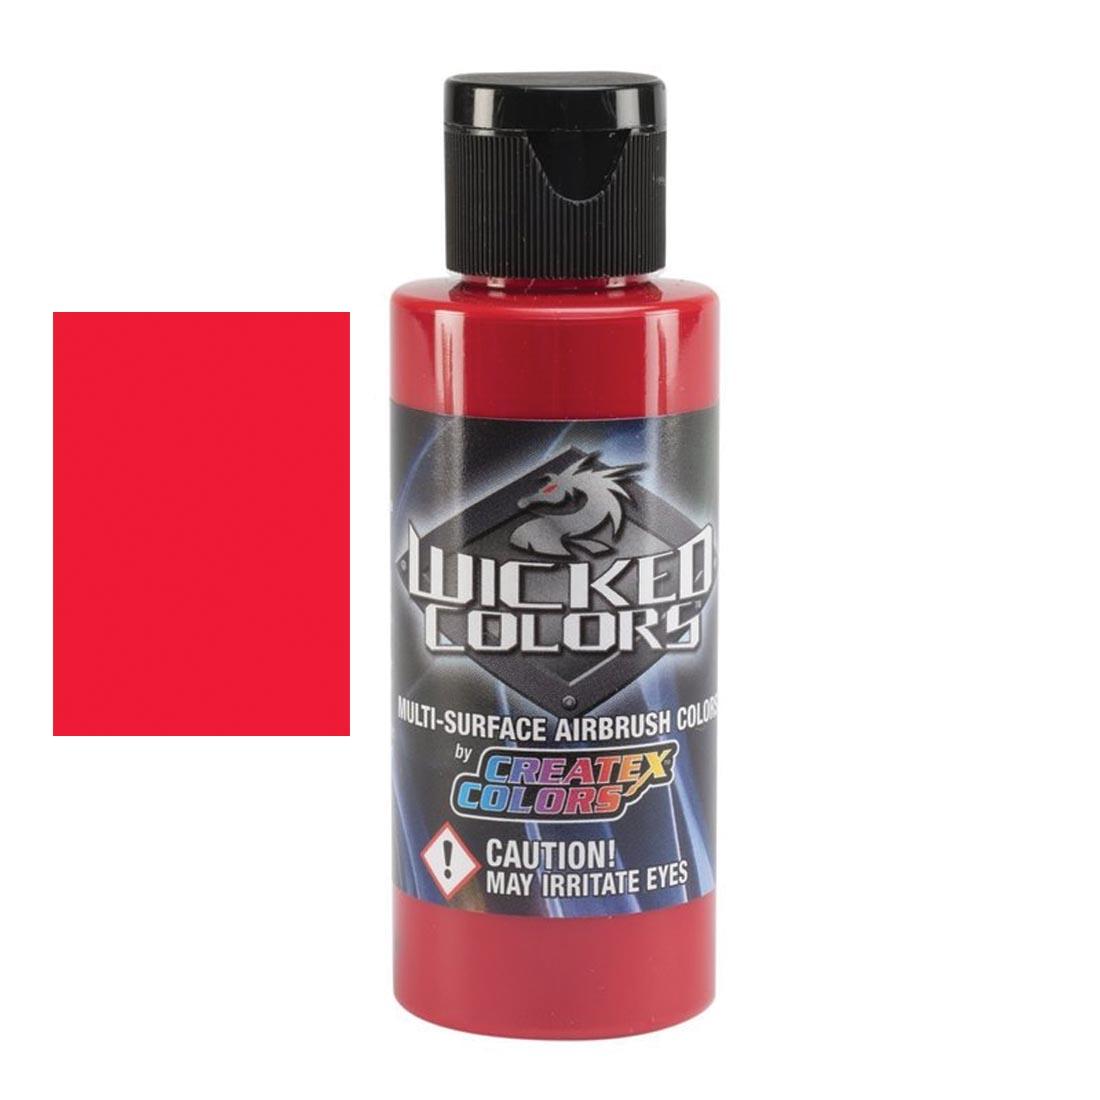 Bottle of Detail Scarlet Createx Wicked Colors Airbrush Paint beside a color swatch